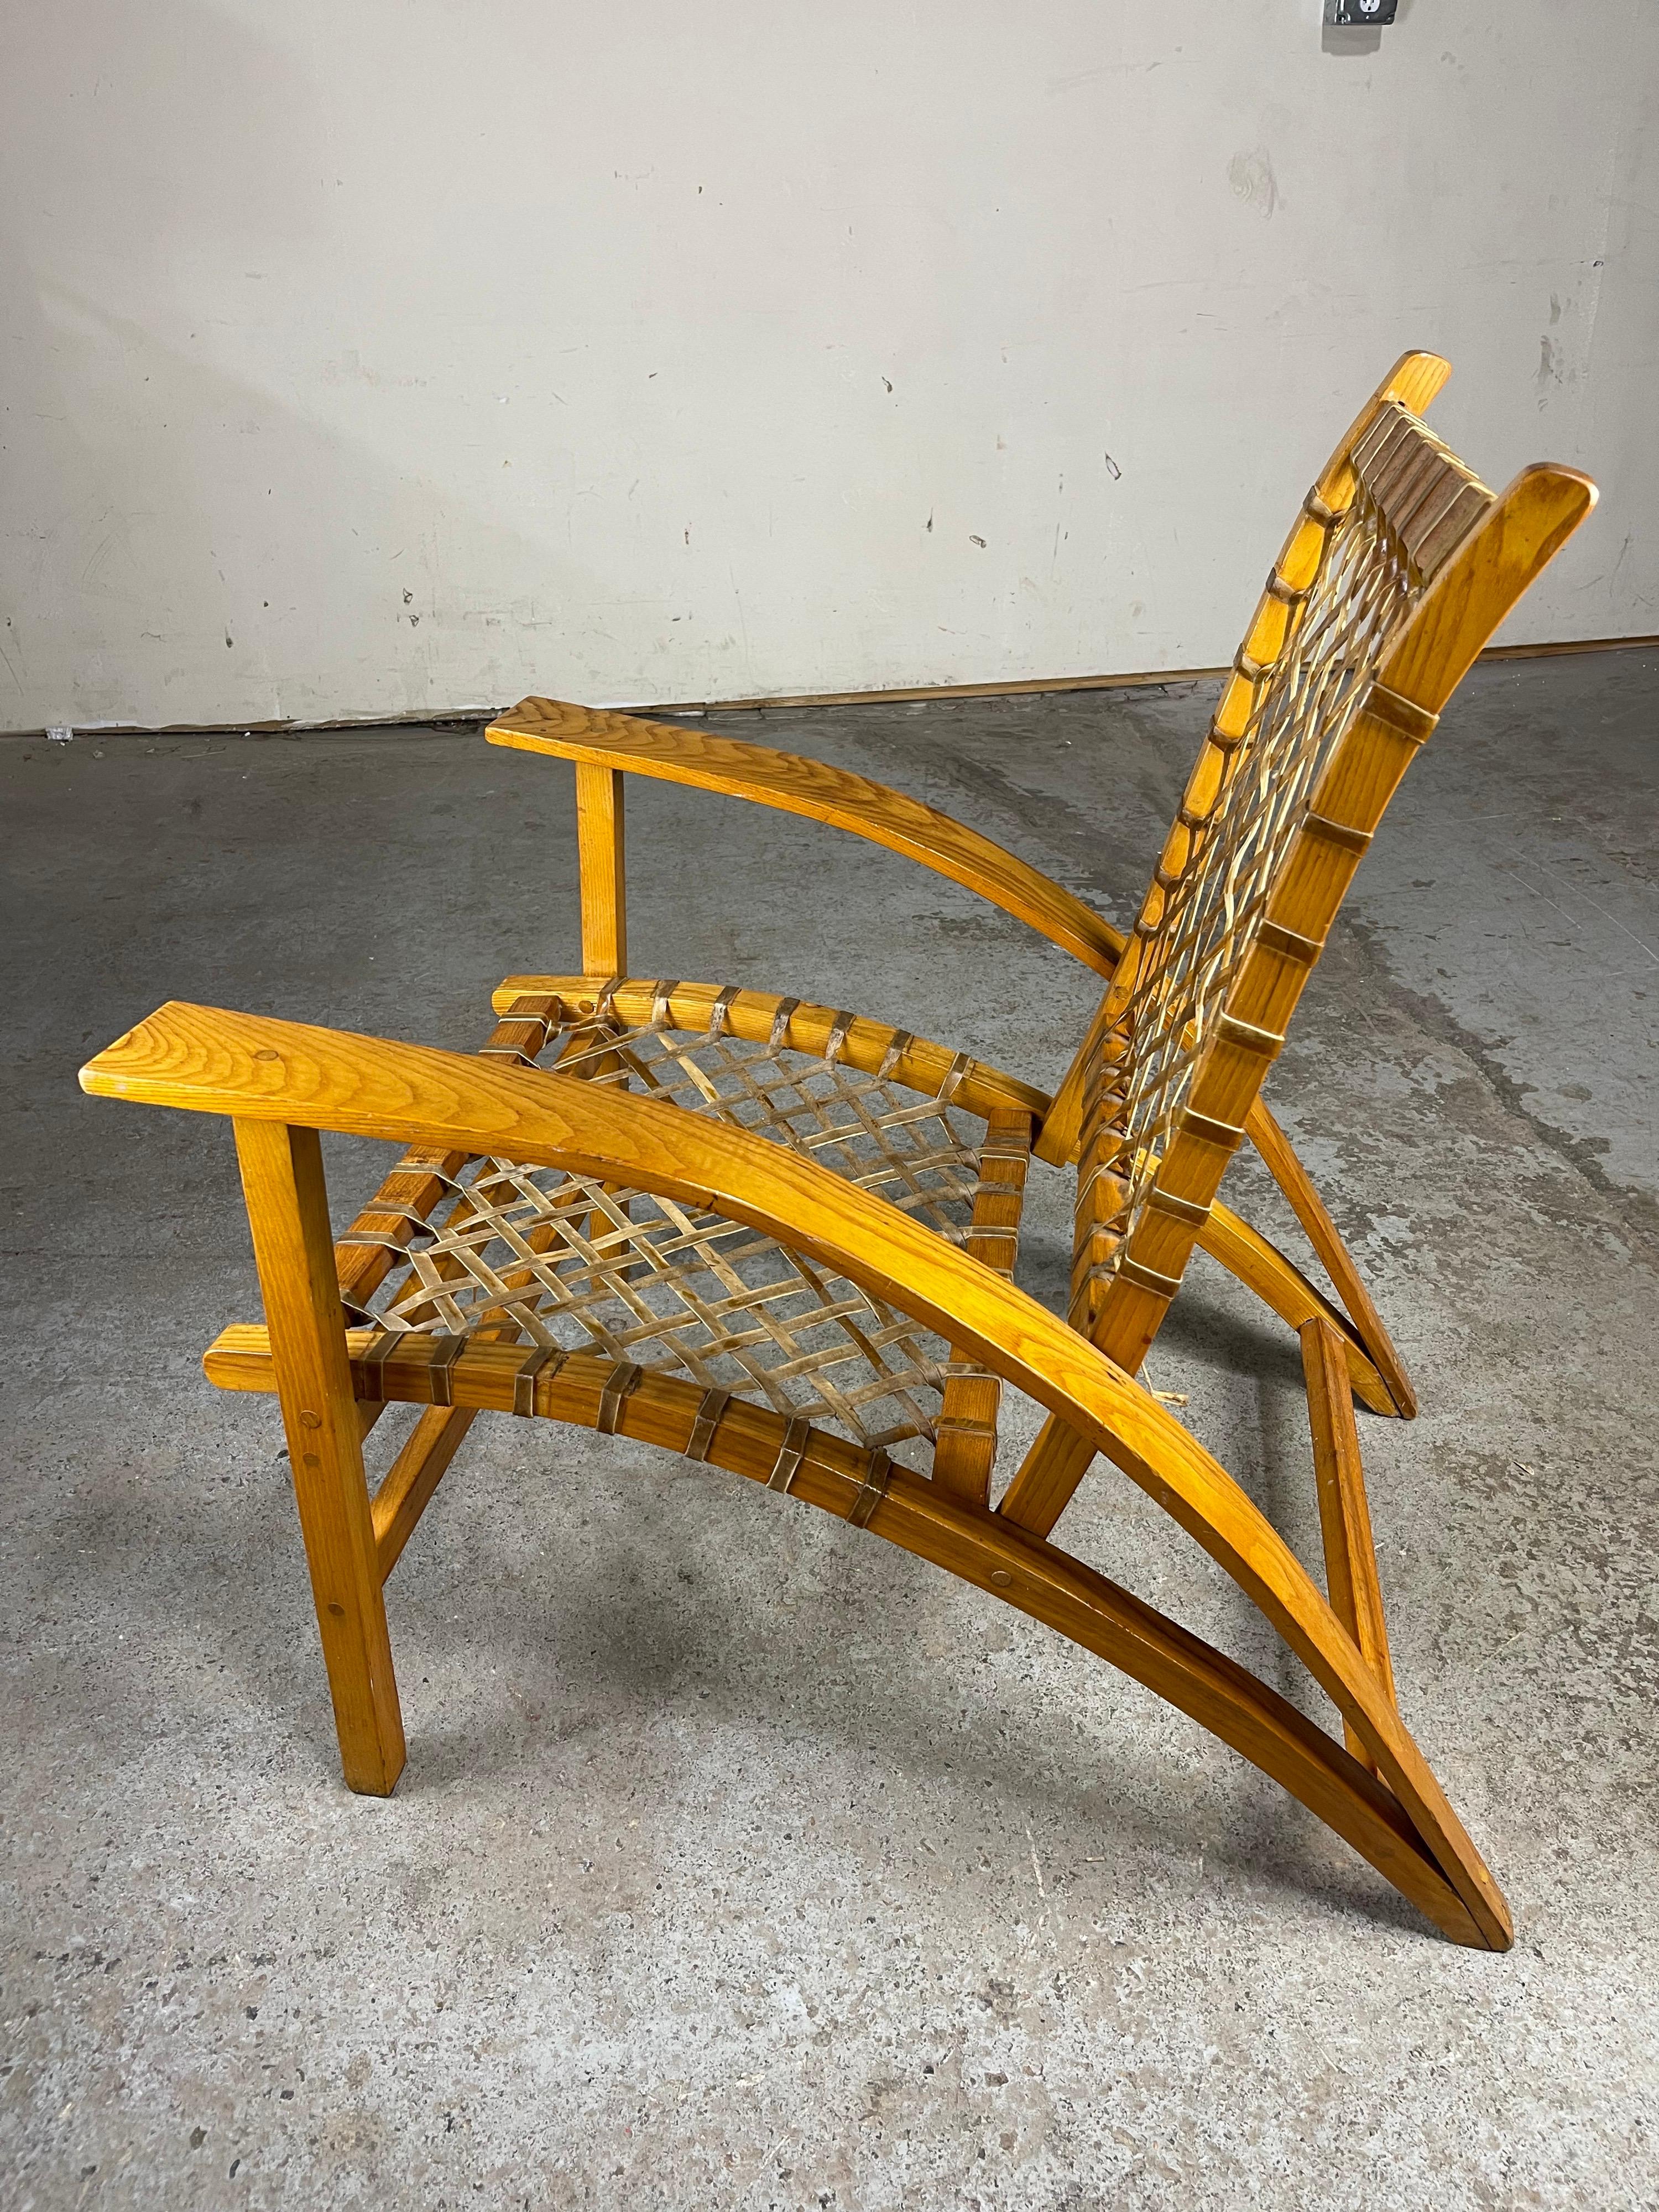 Mid-20th Century 'Snow Shu' Lounge Chair by Carl Koch for Vermont Tubbs 1952 Adirondack Style